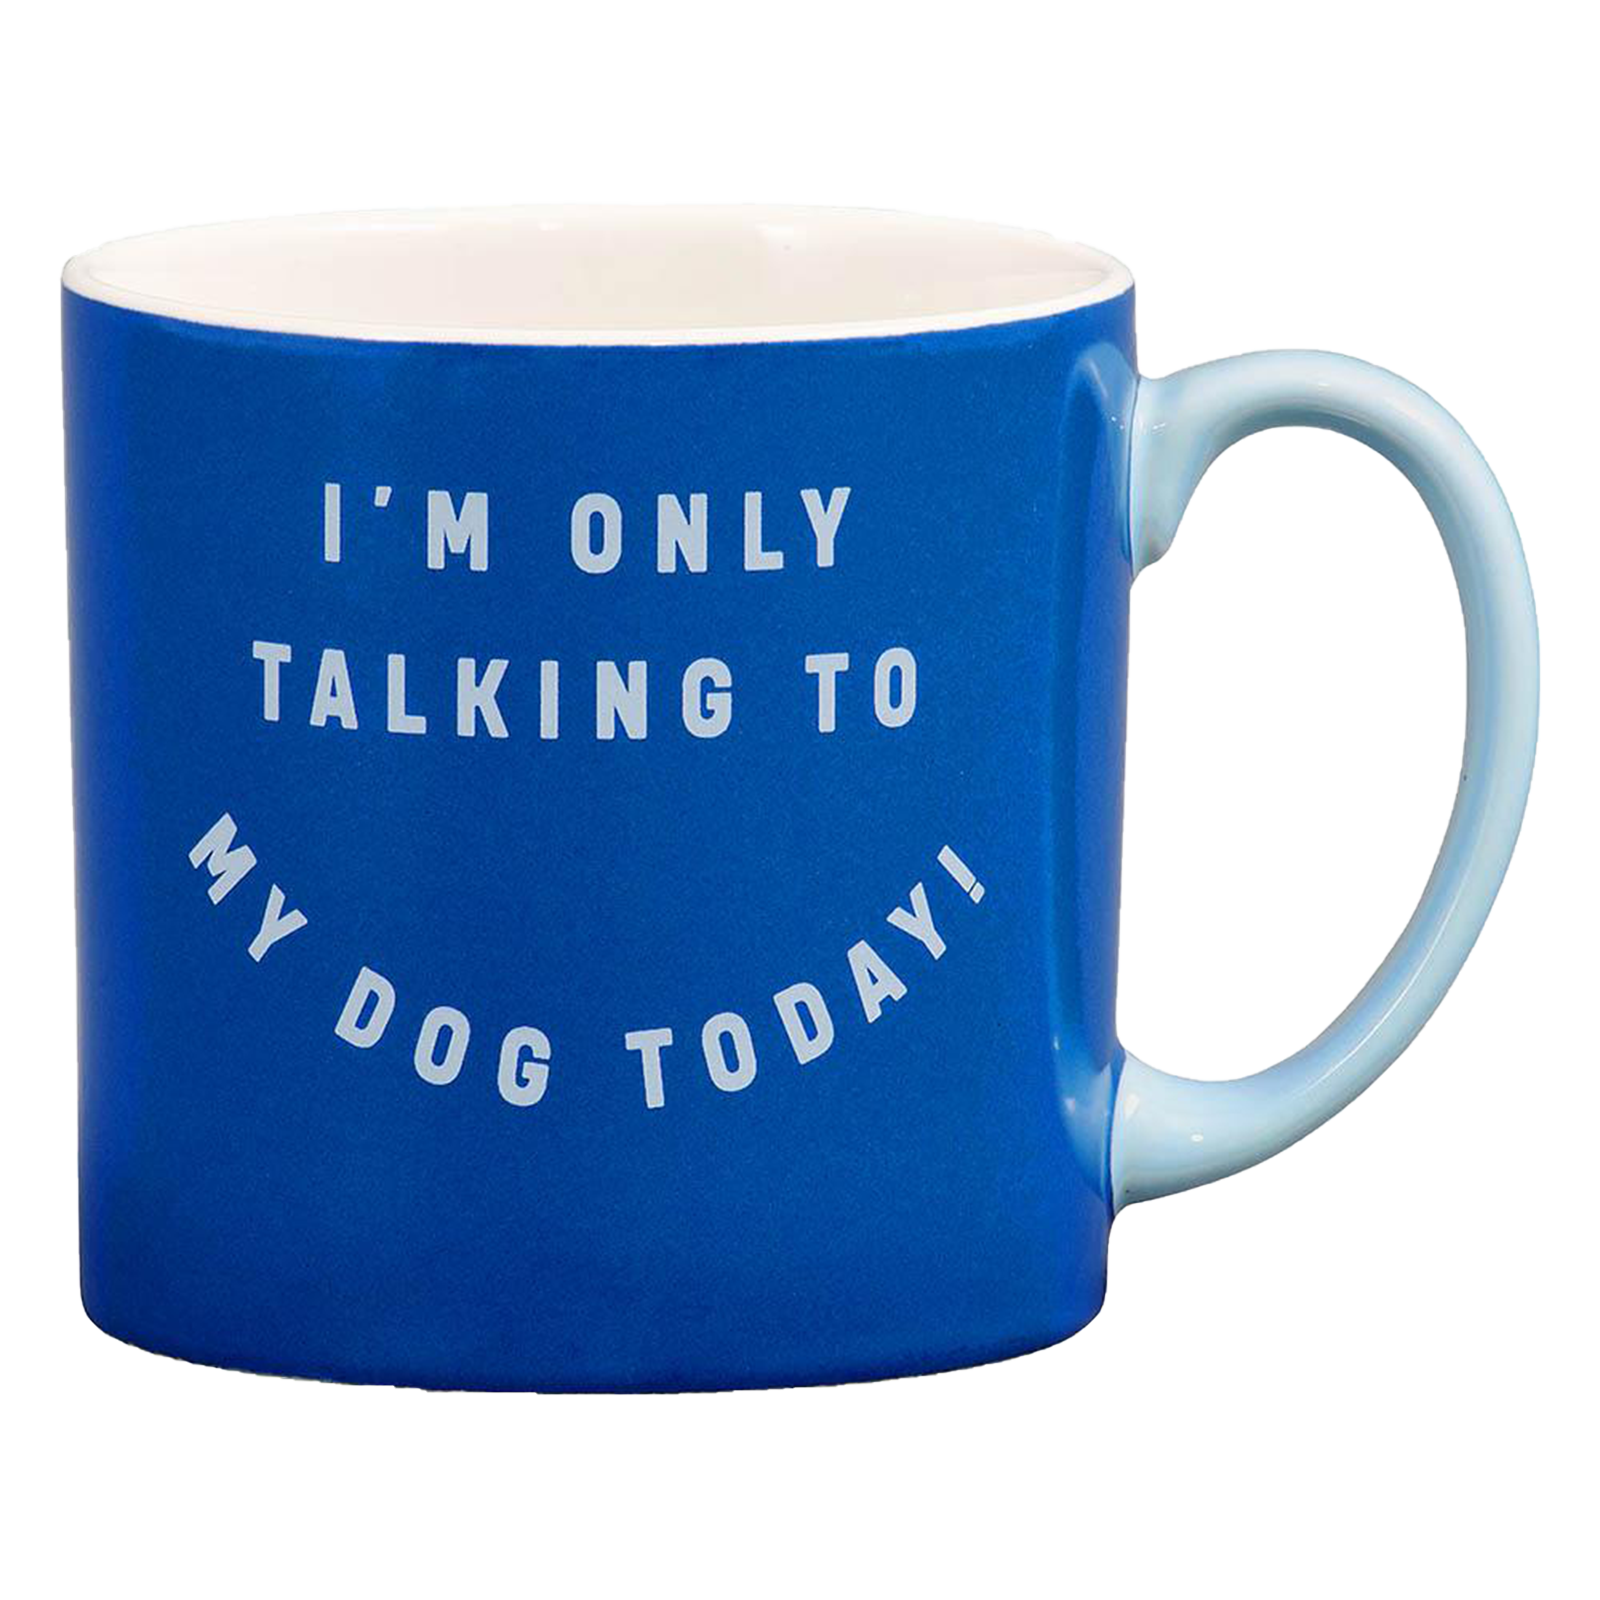 "I'm Only Talking to My Dog Today" Mug